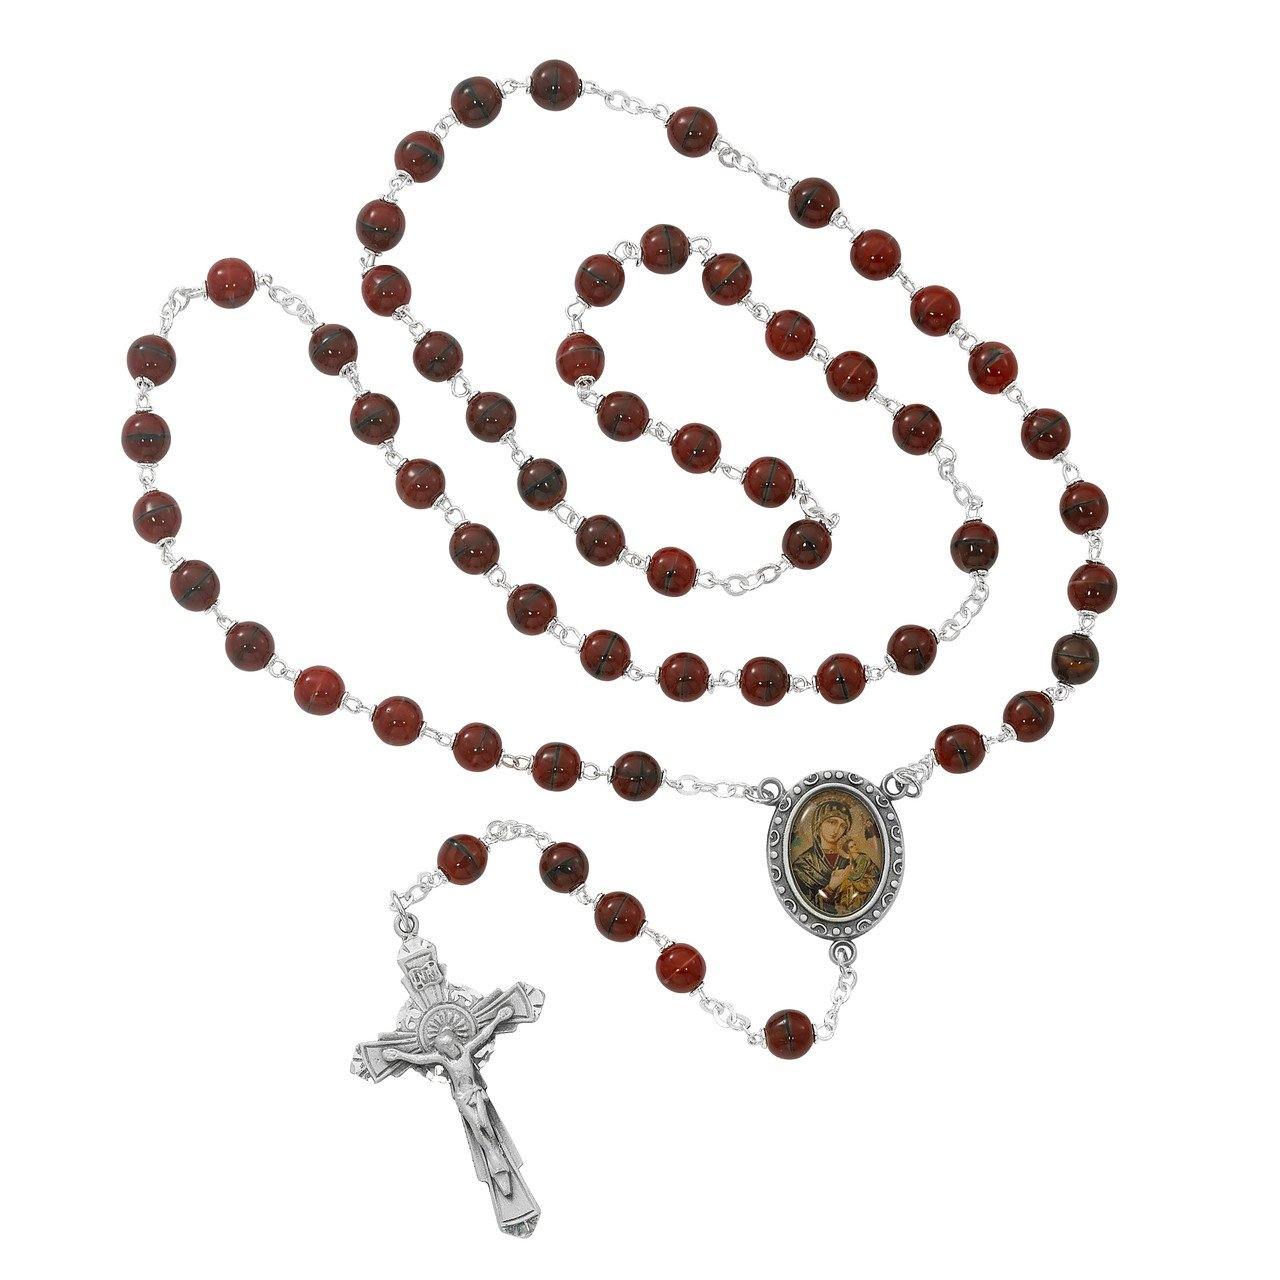 Our Lady of Perpetual Help Rosary - 7mm - McVan - Chiarelli's Religious Goods & Church Supply